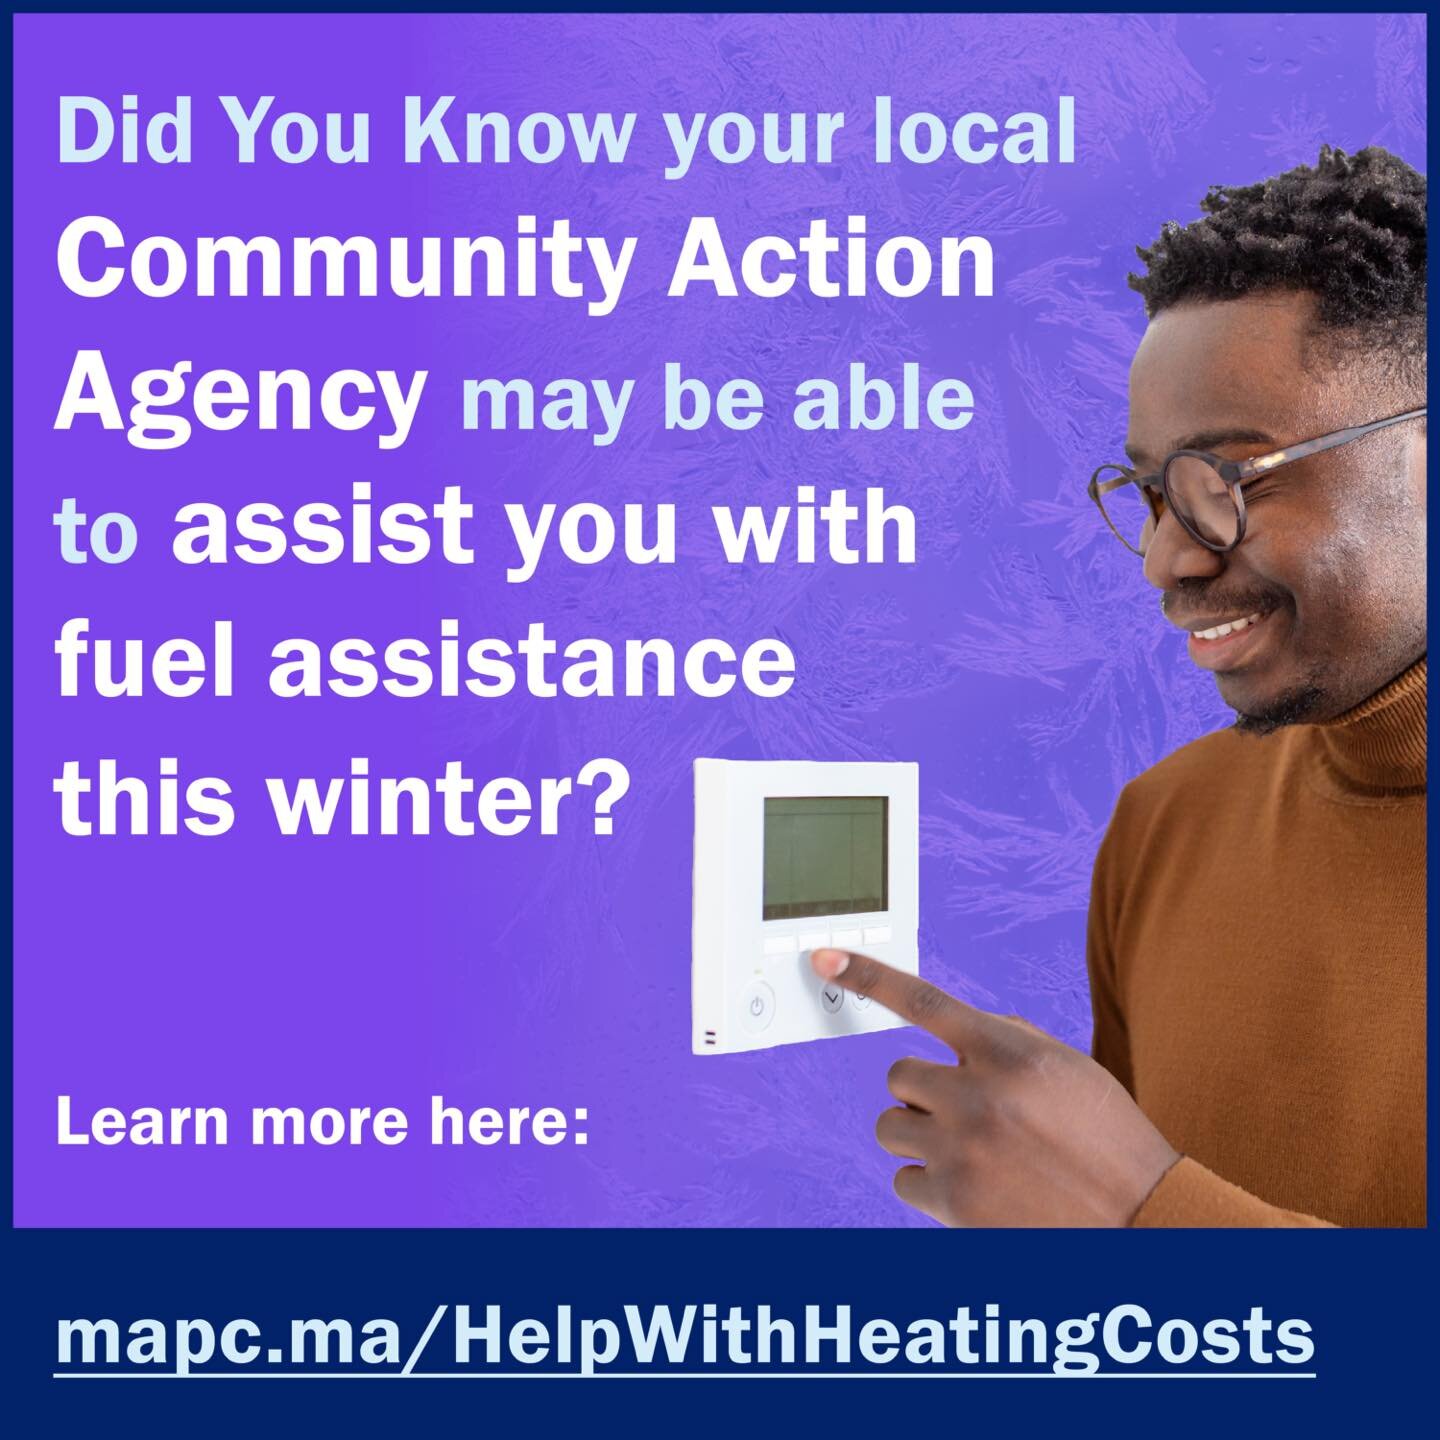 Did You Know that your local Community Action Agency may be able to assist you with fuel assistance this winter? Learn more here: mapc.ma/HelpWithHeatingCosts